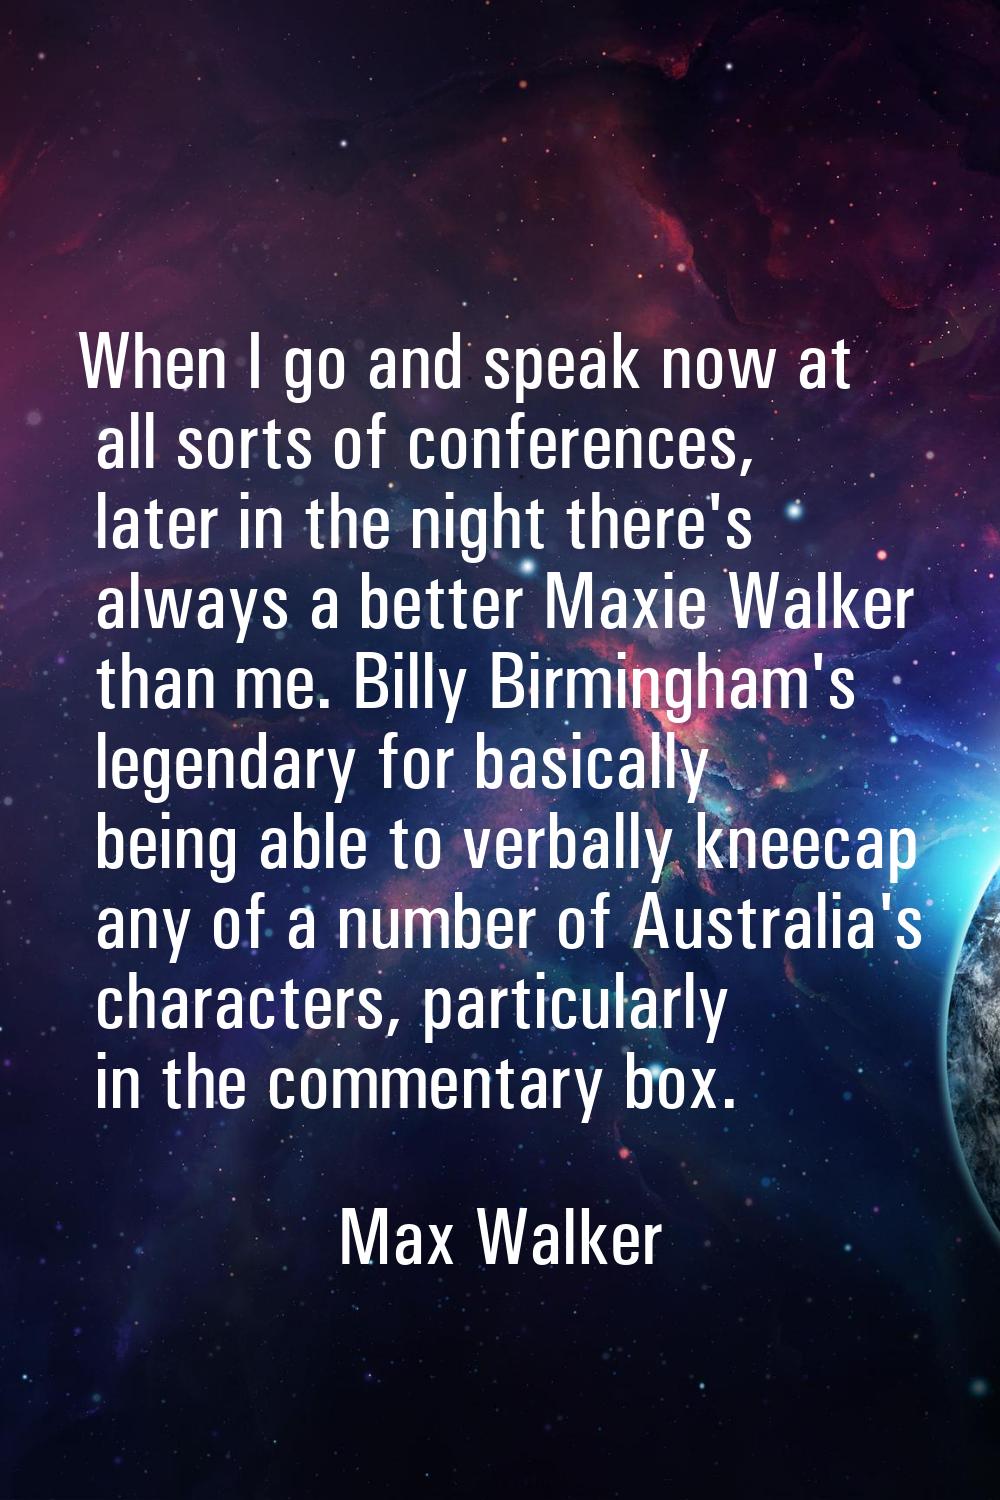 When I go and speak now at all sorts of conferences, later in the night there's always a better Max